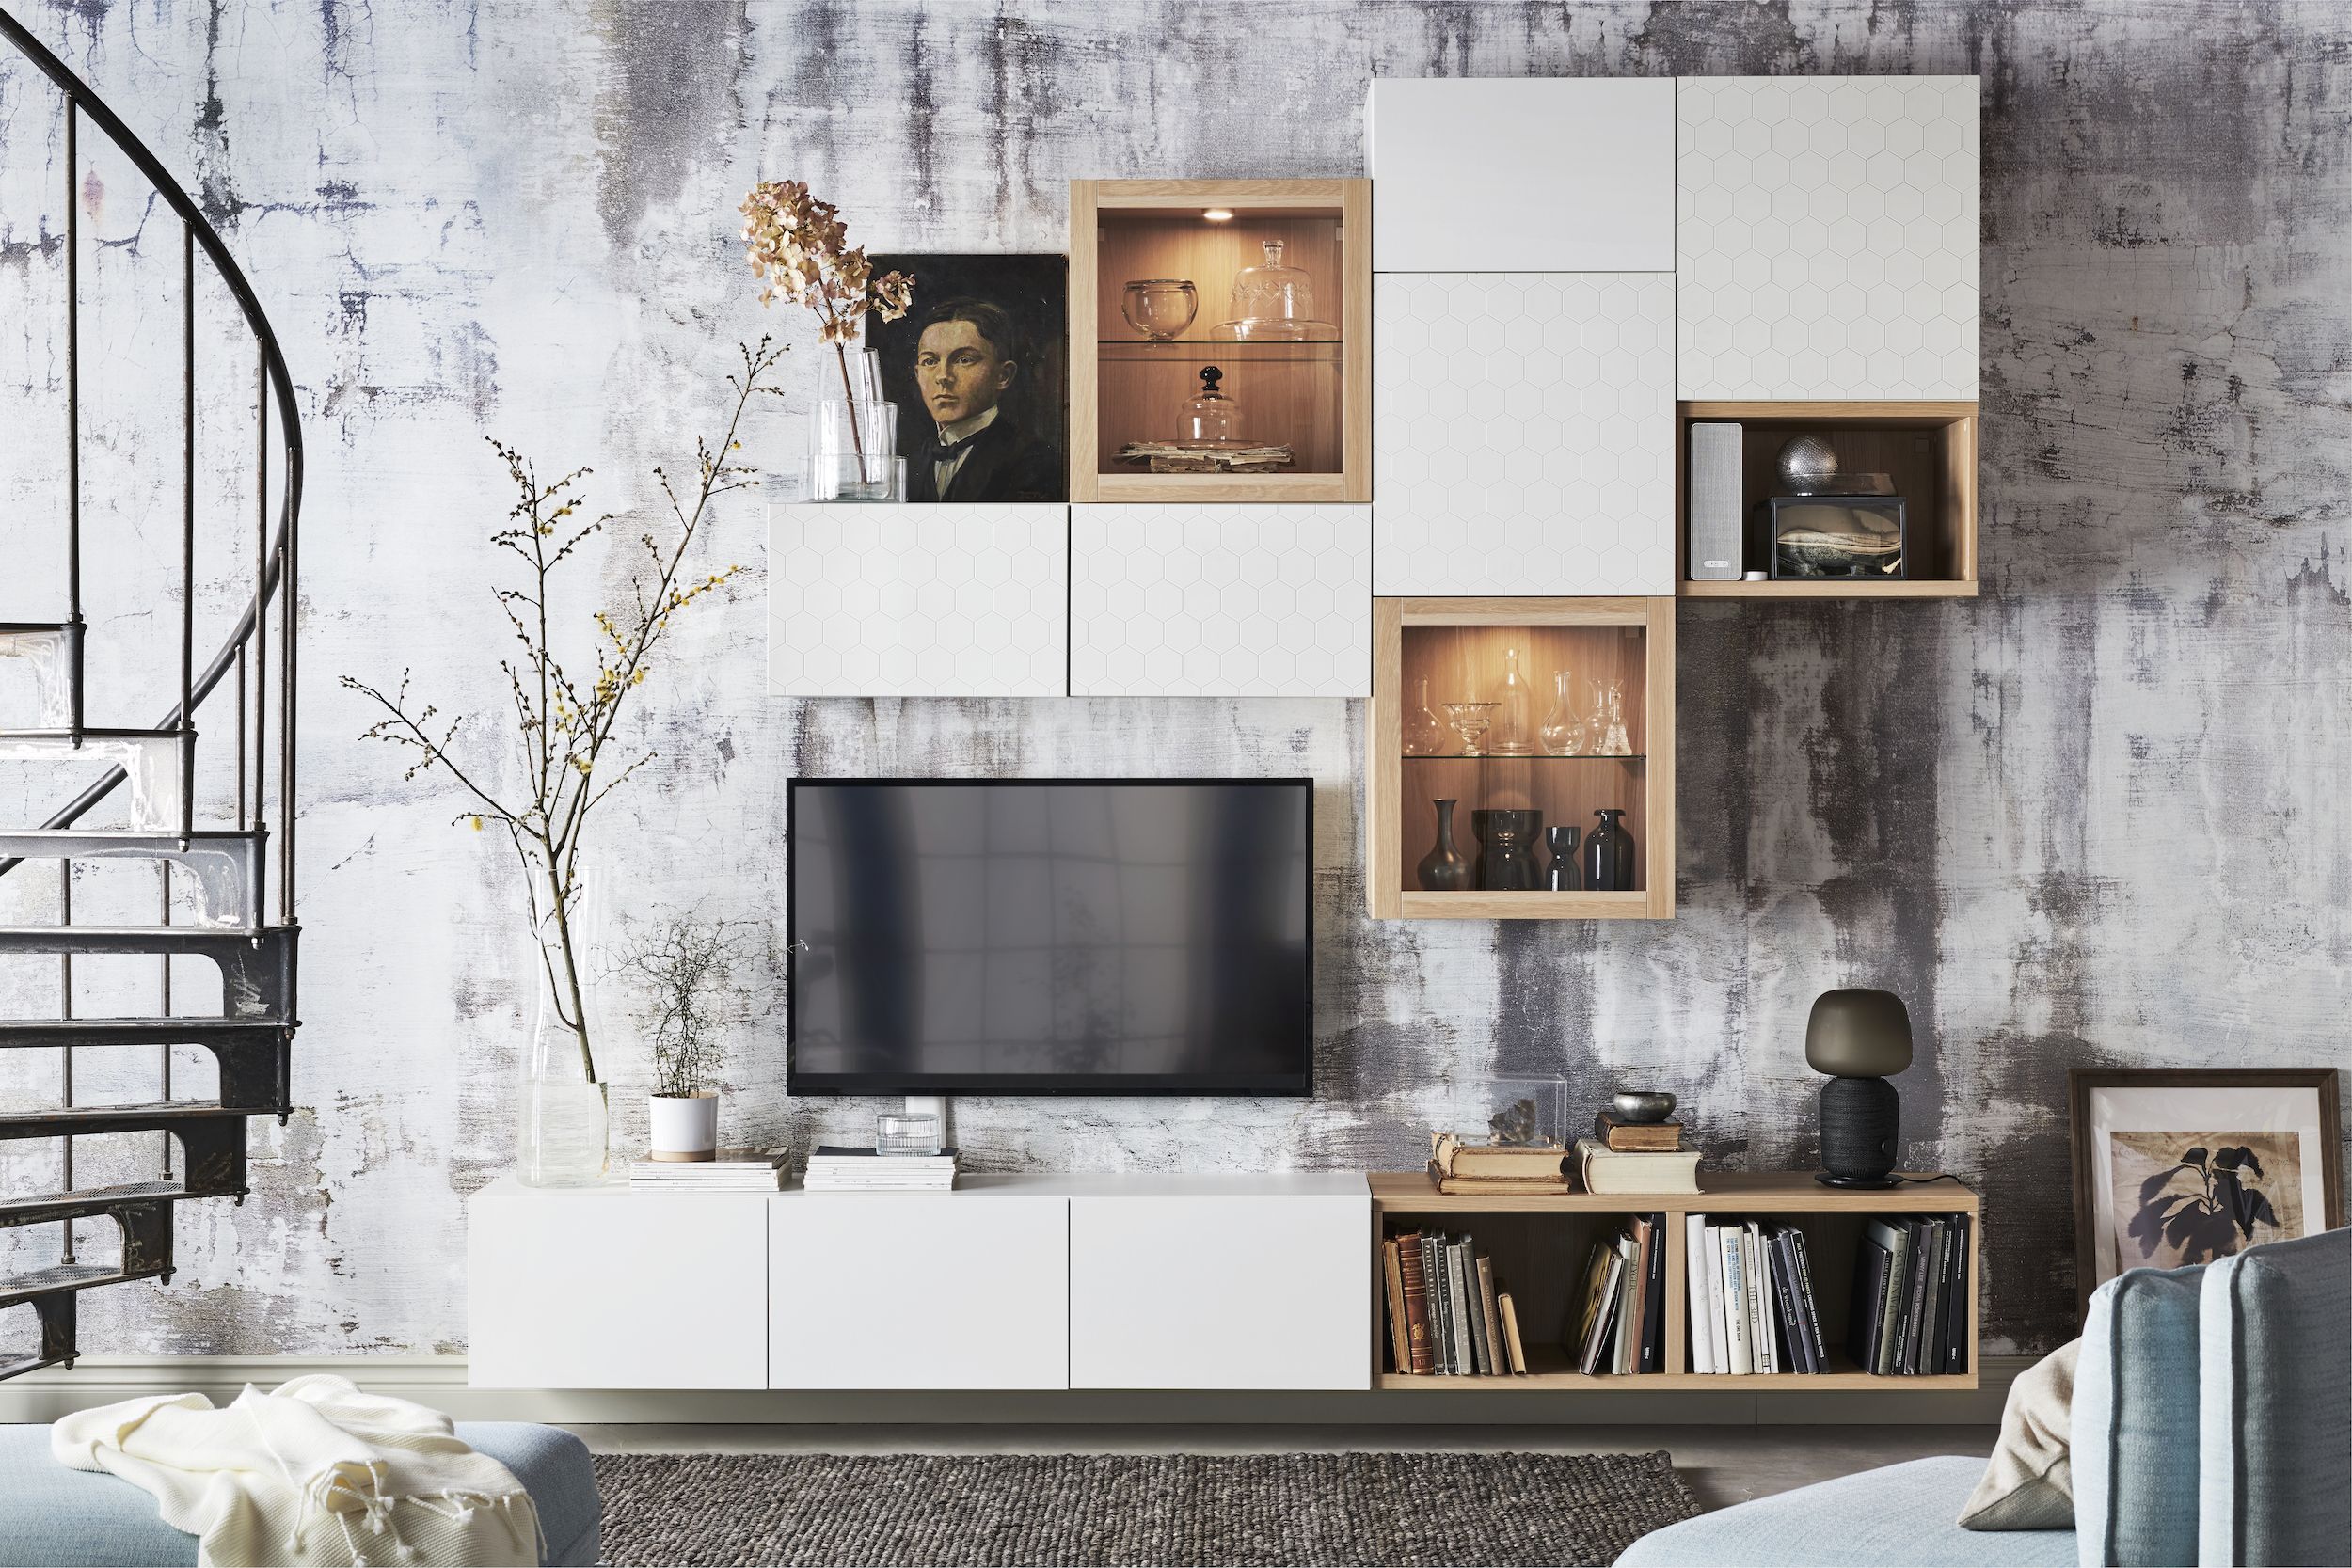 11 TV Wall Ideas That's Both Practical And Stylish